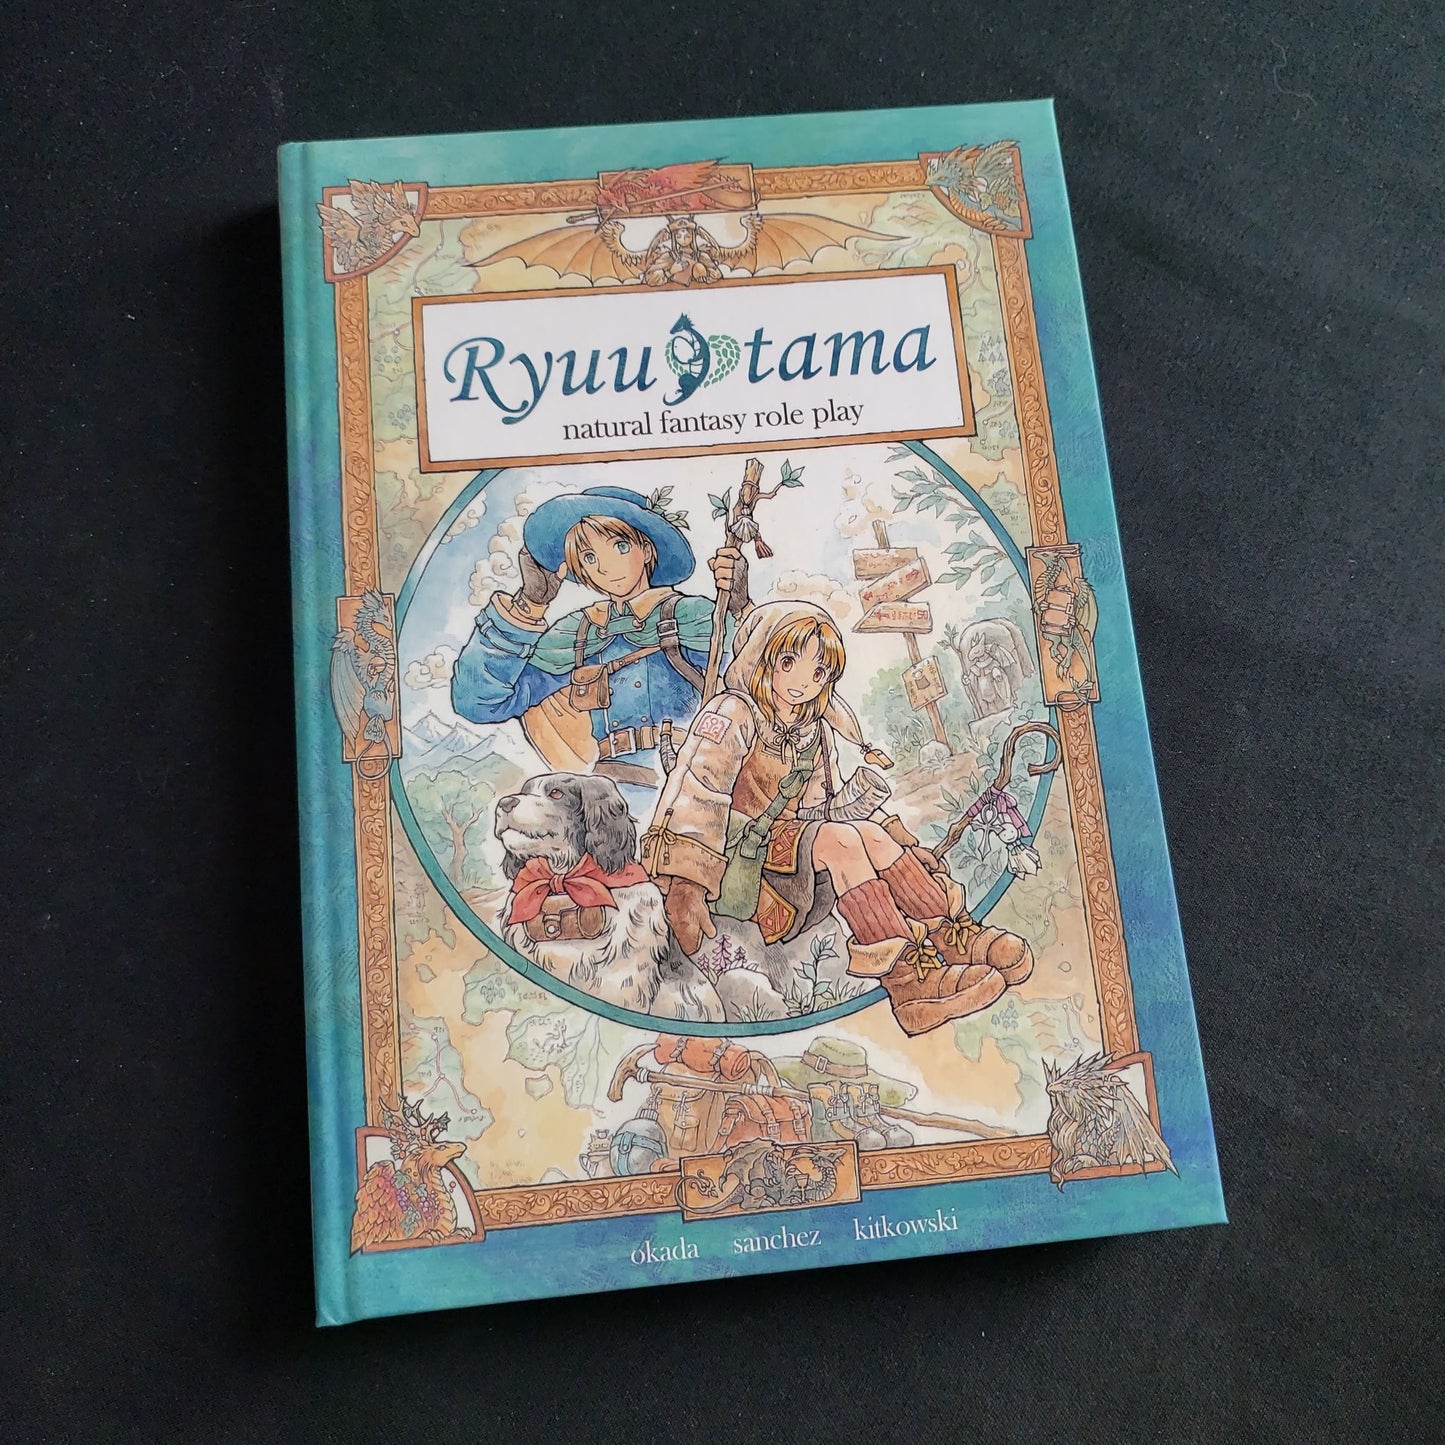 Image shows the front cover of the Ryuutama roleplaying game book